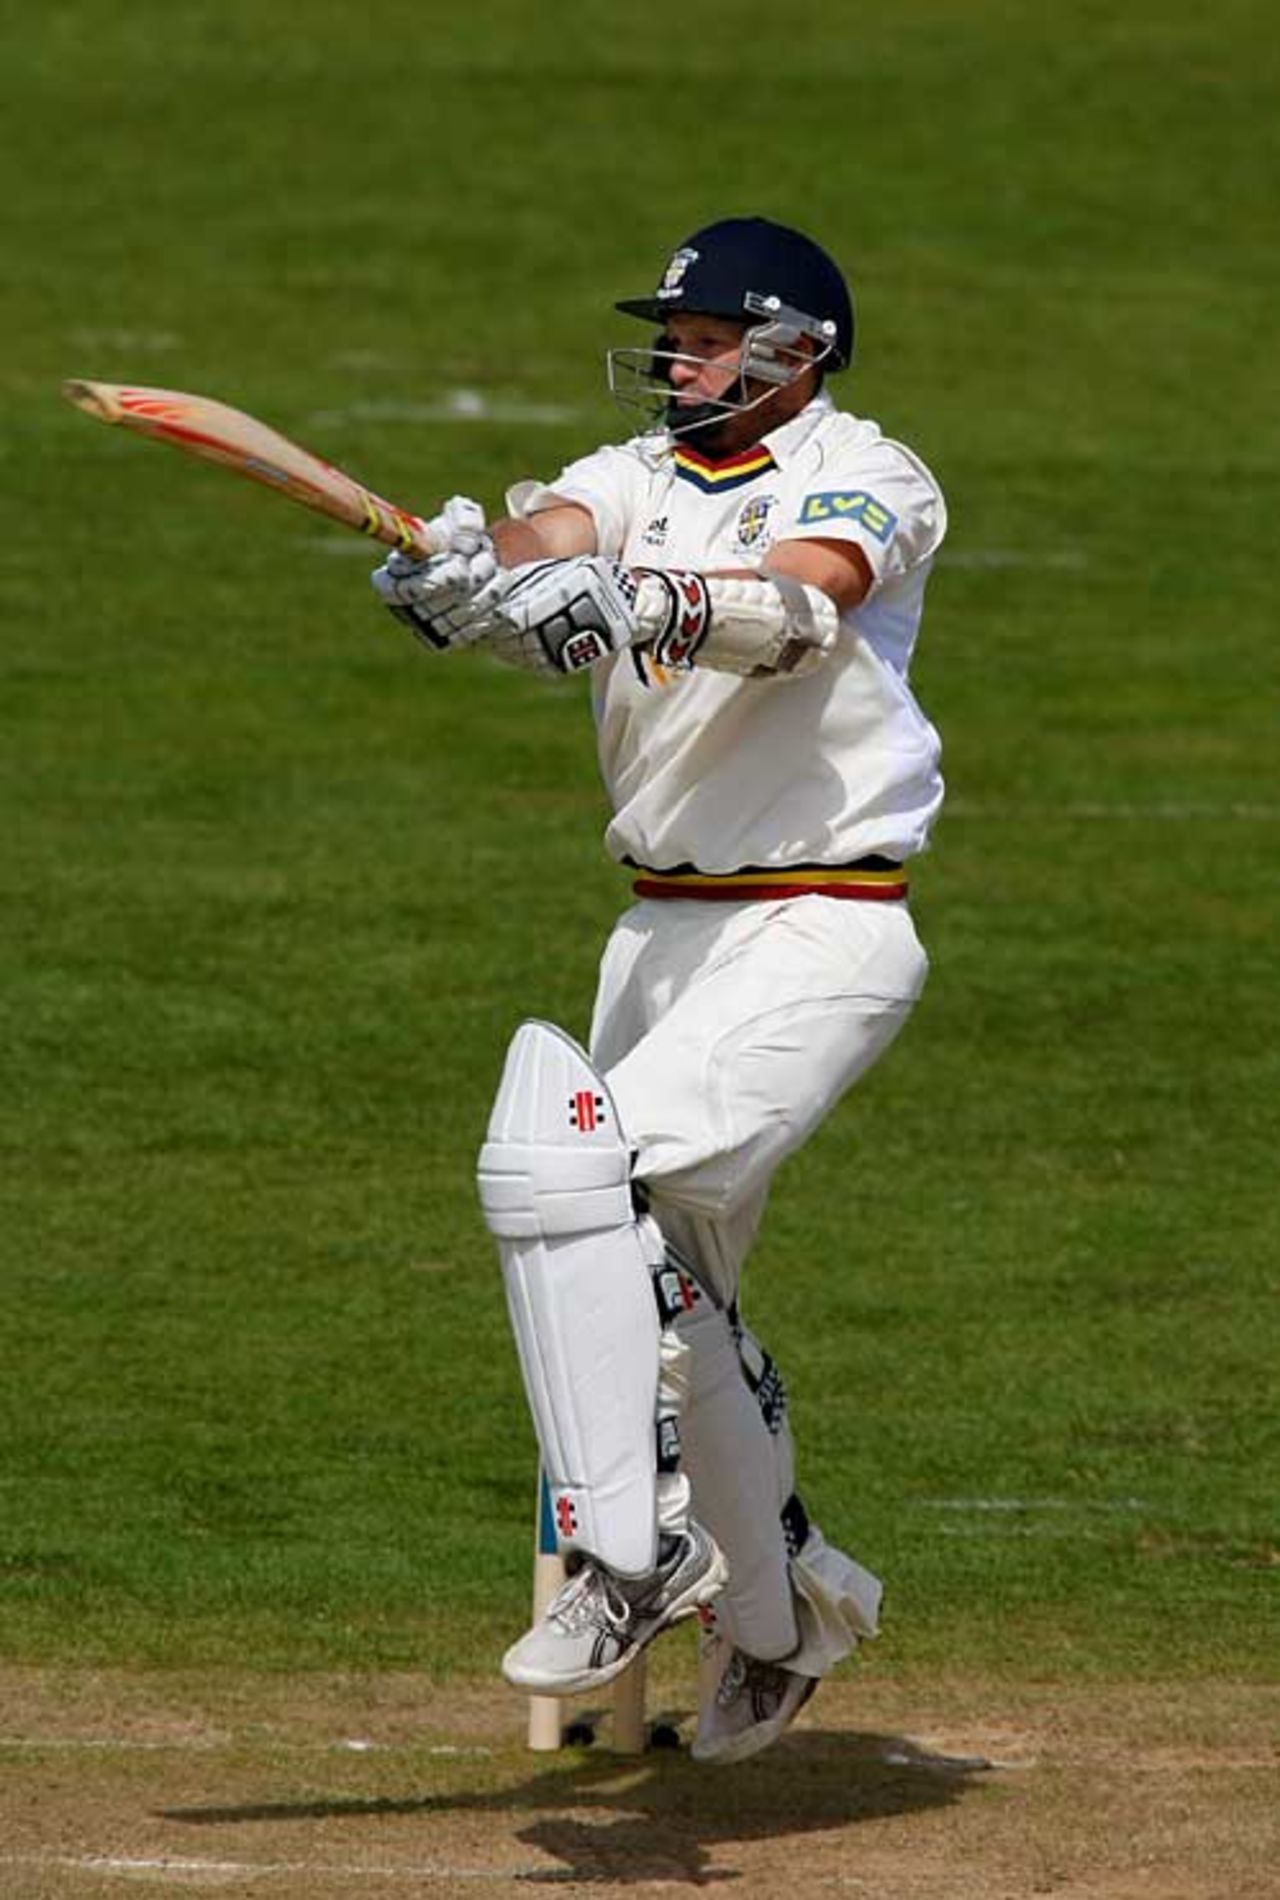 Dale Benkenstein finished with 181, Somerset v Durham, County Championship Division One, Taunton, April 29, 2008